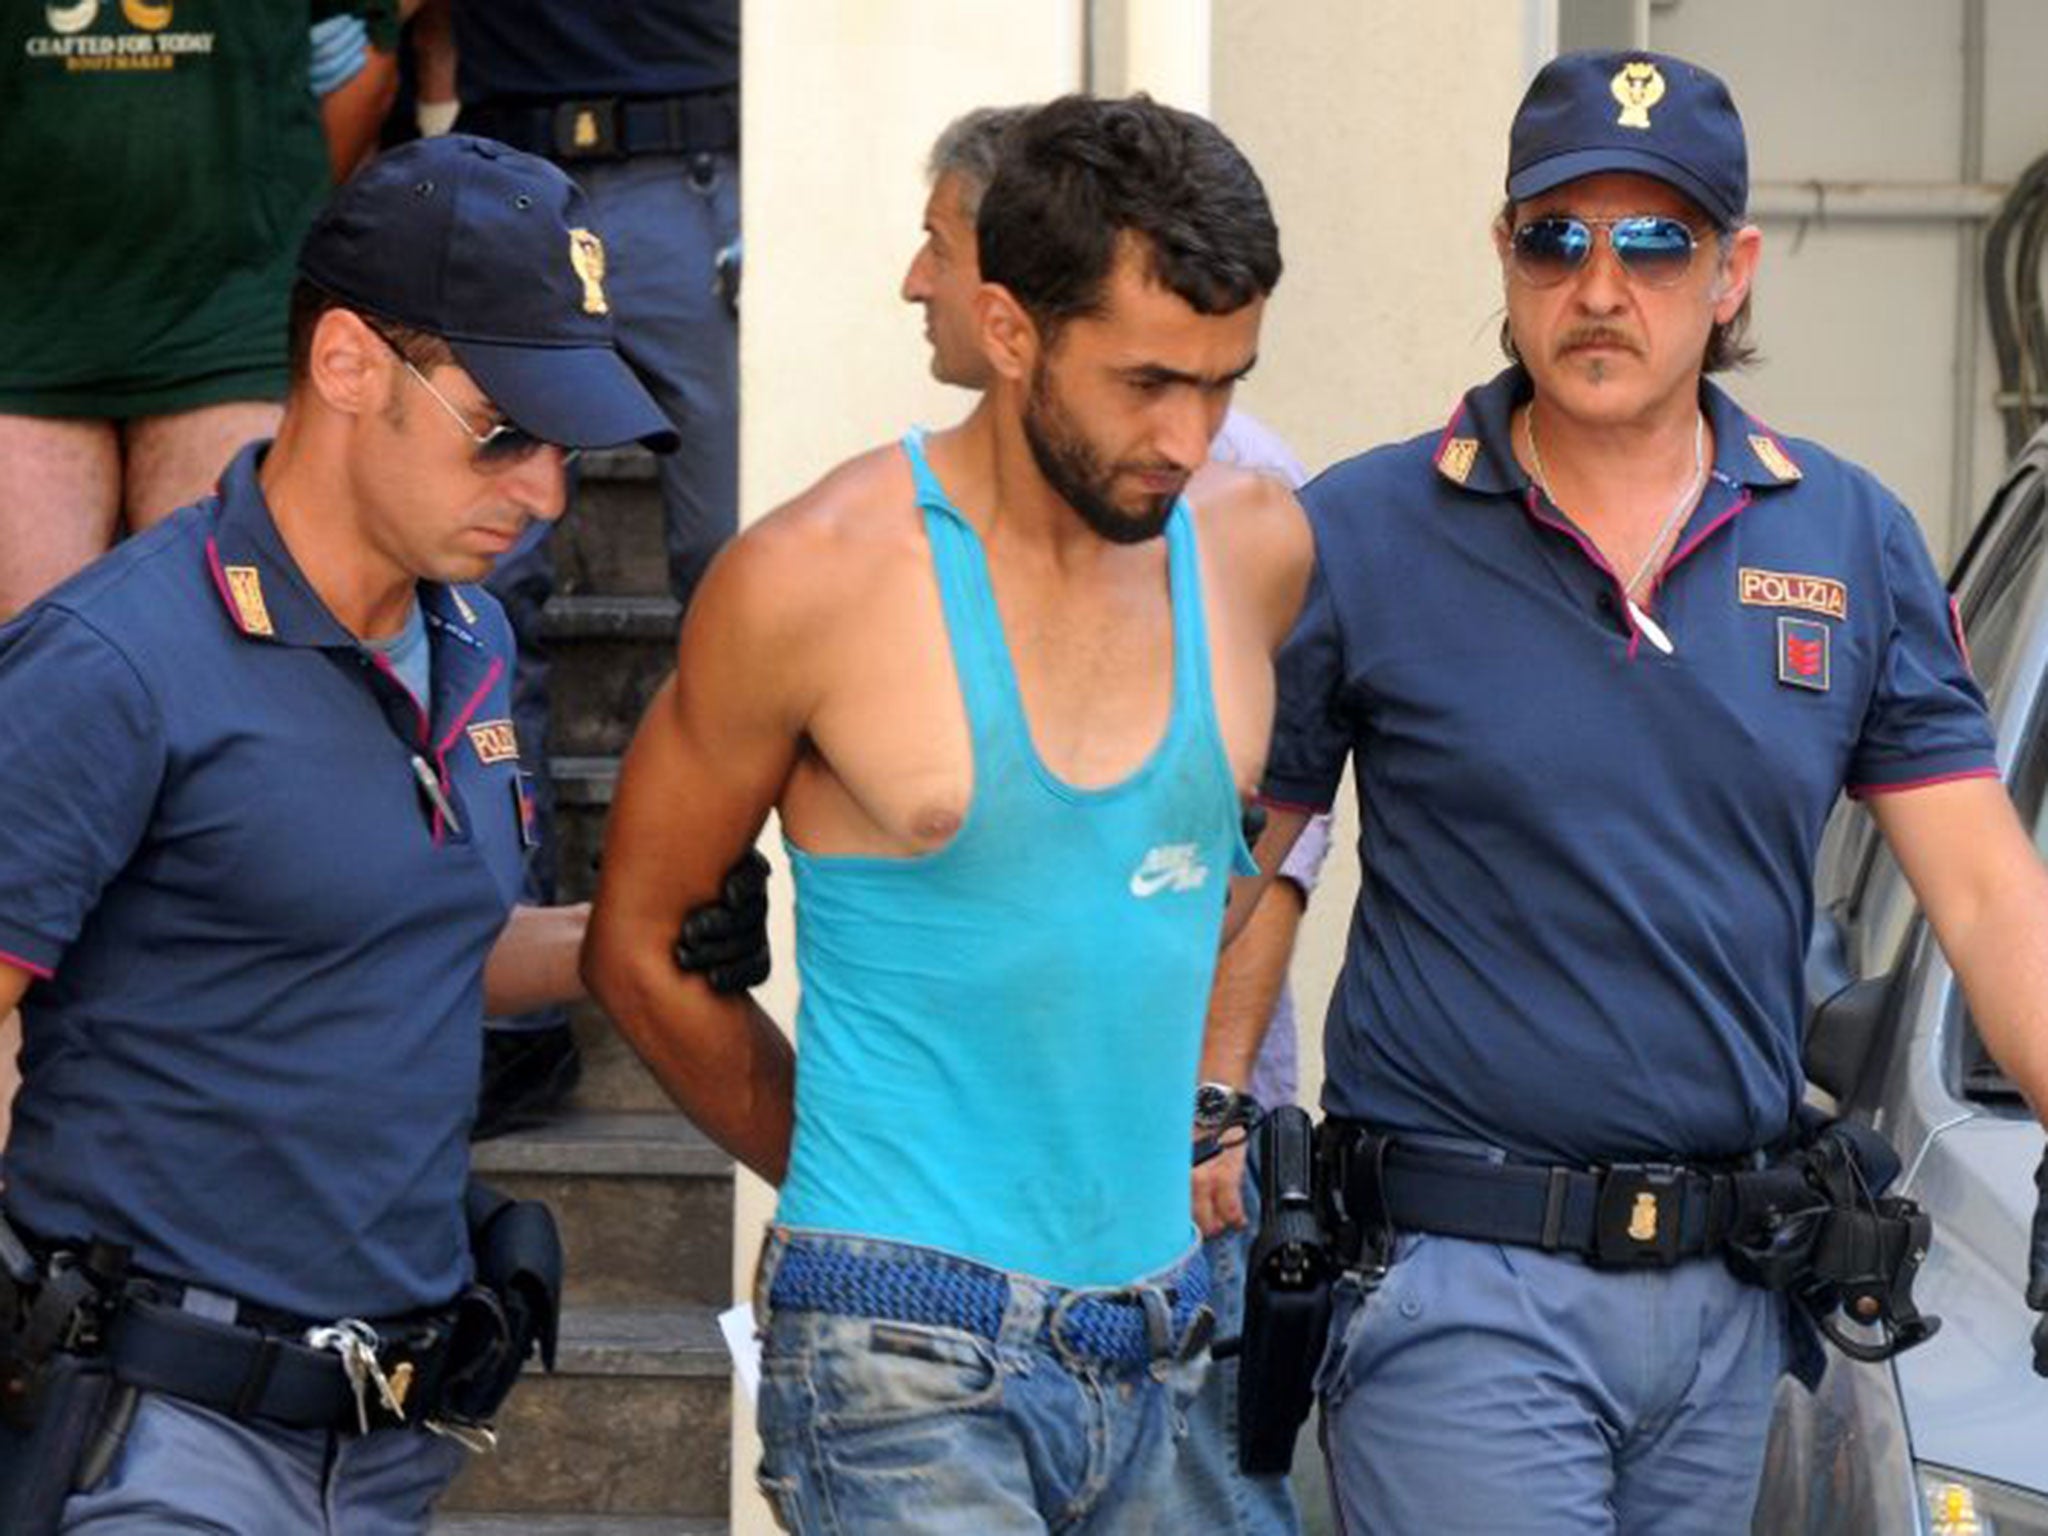 Italian police officers take in custody Imad Busadia, center, one of the five alleged smugglers who were detained on Thursday